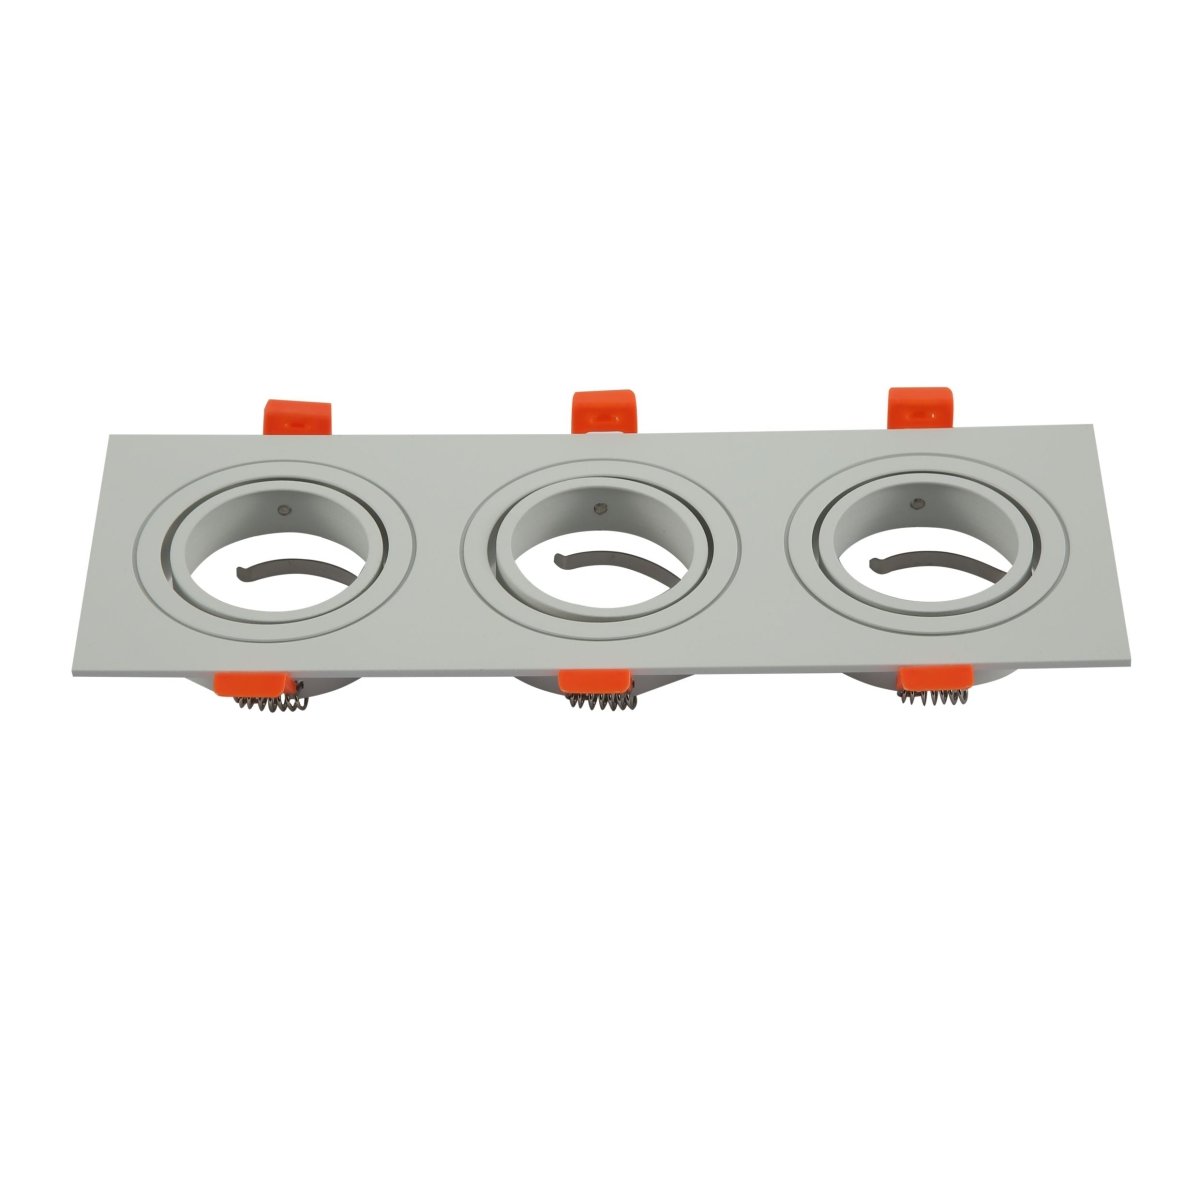 Main image of Rectangle Recessed Tilt Downlight White with 3xGU10 Fitting | TEKLED 165-03888